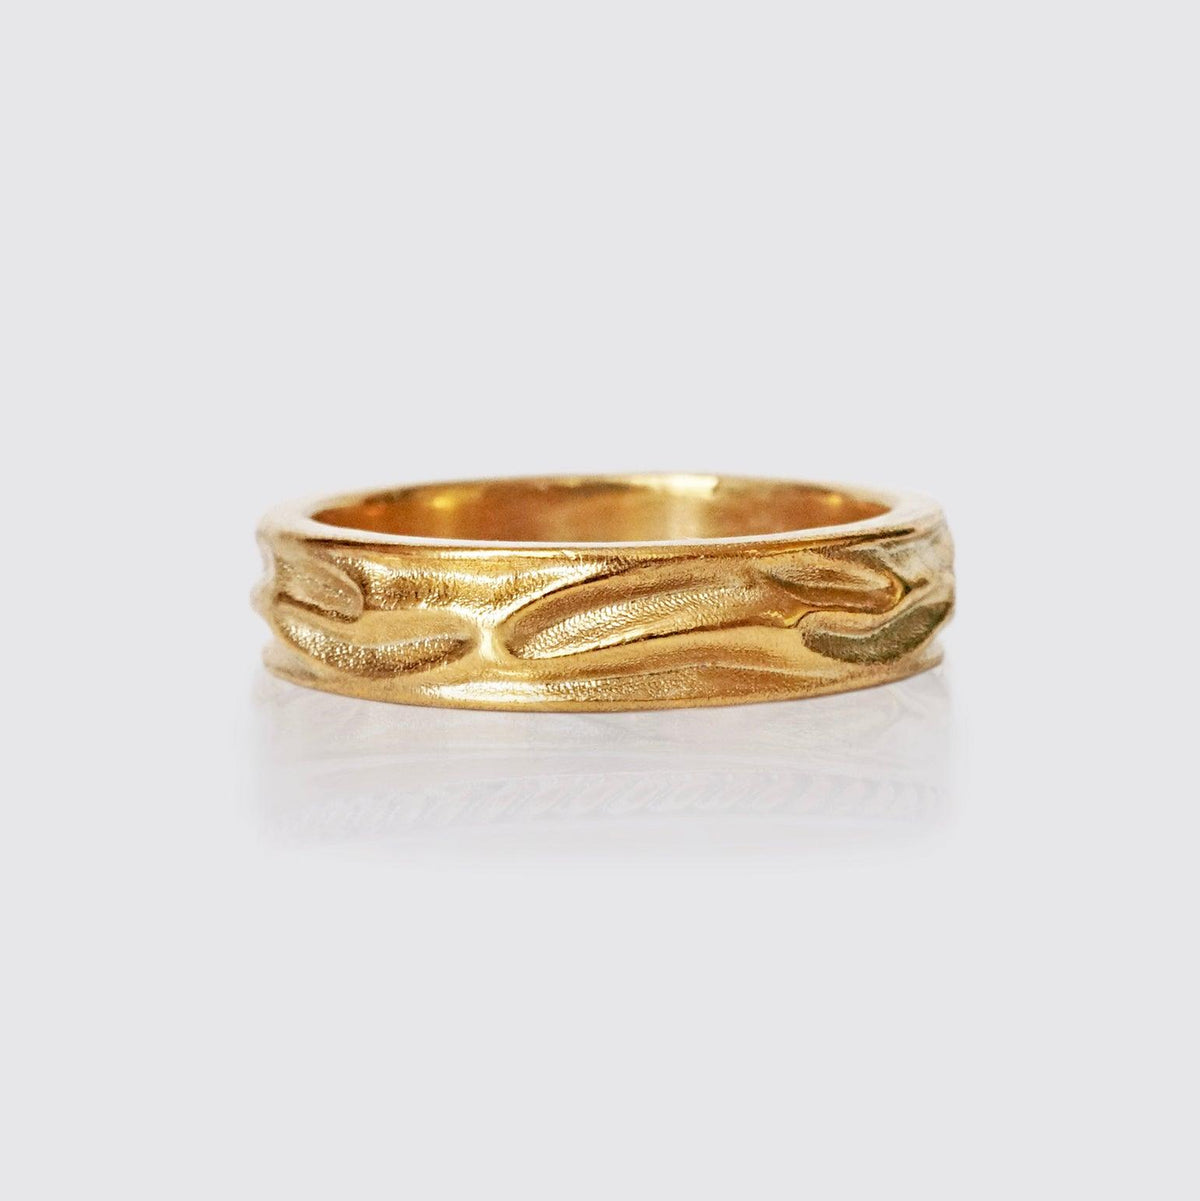 Liquid Ring in Sterling Silver and 14K Gold, 5mm - Tippy Taste Jewelry